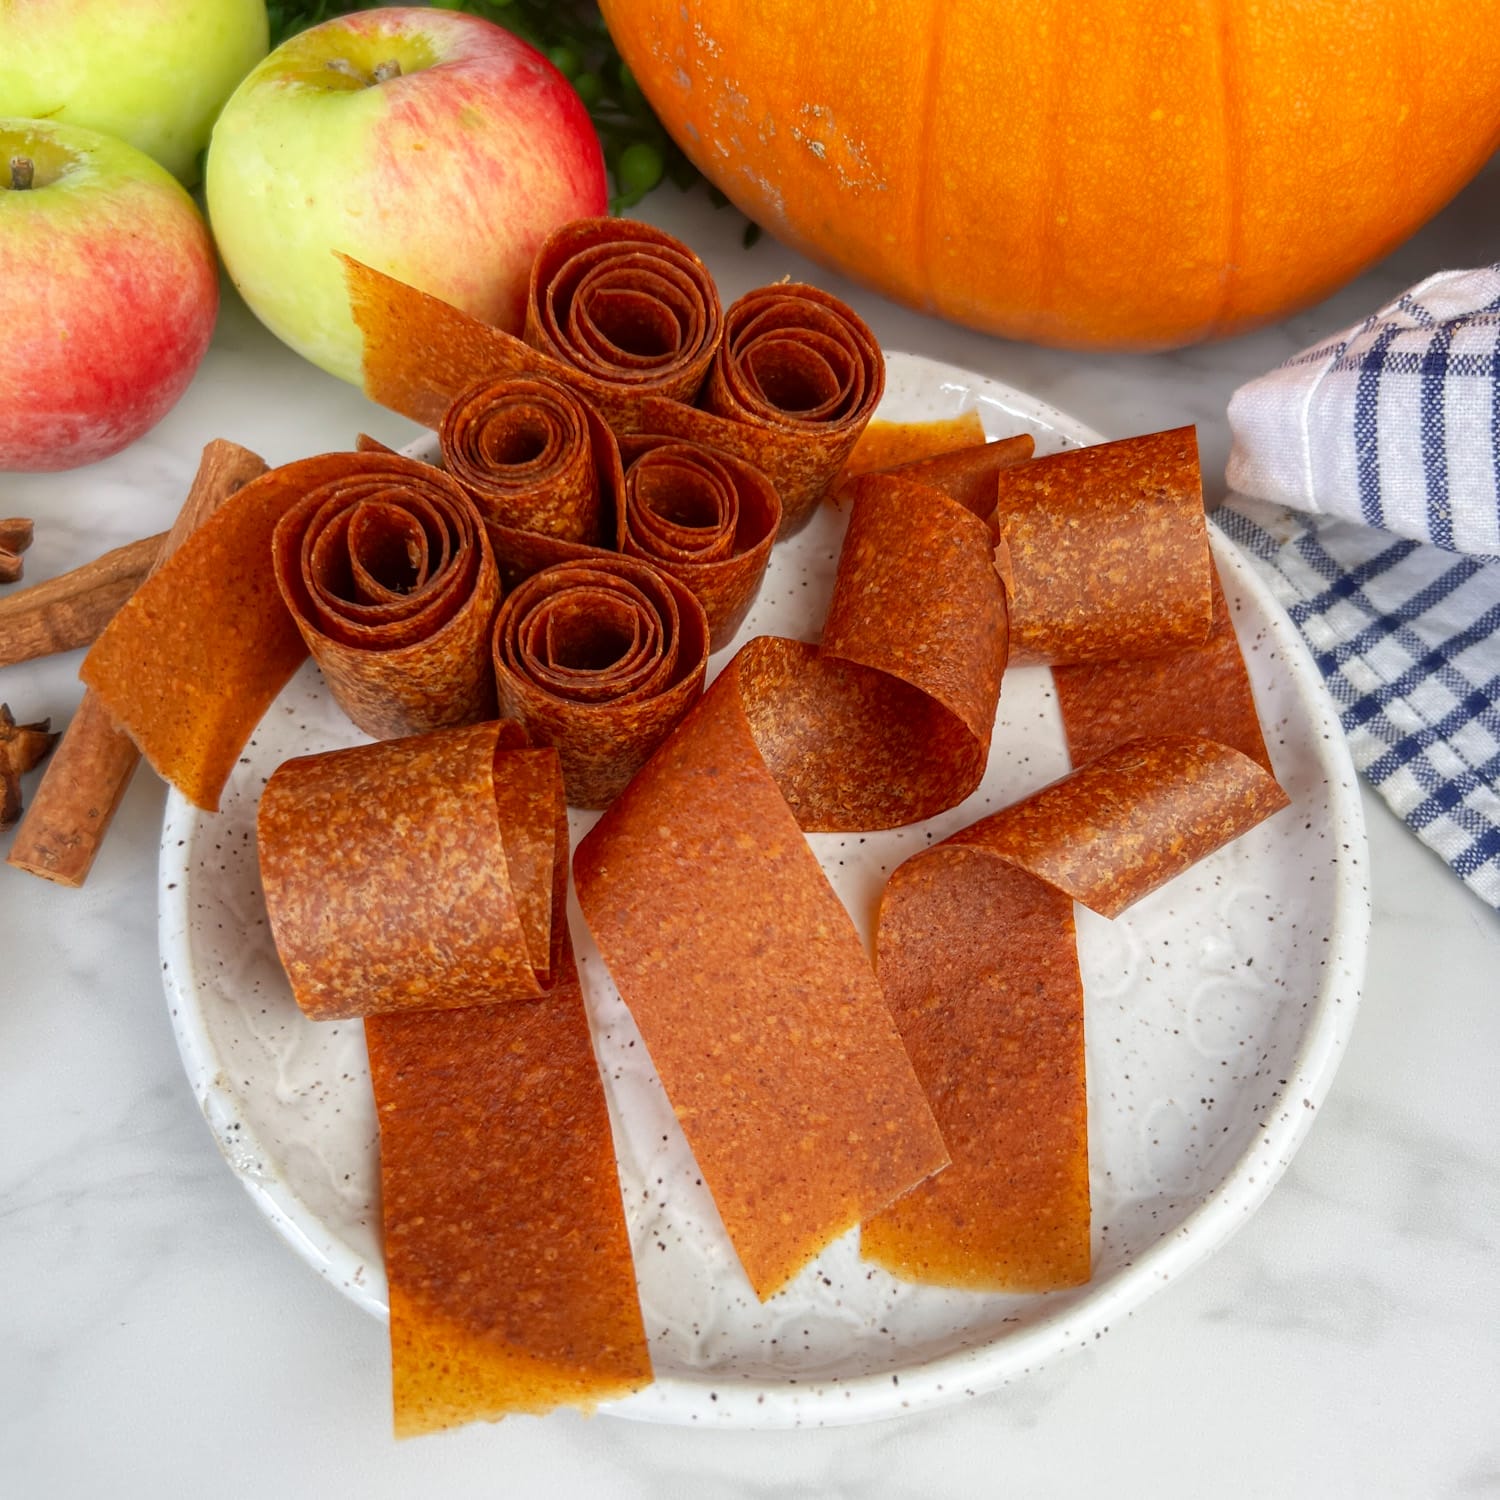 How to Make Homemade Fruit Roll-Ups – Pumpkin Pie Fruit Leather